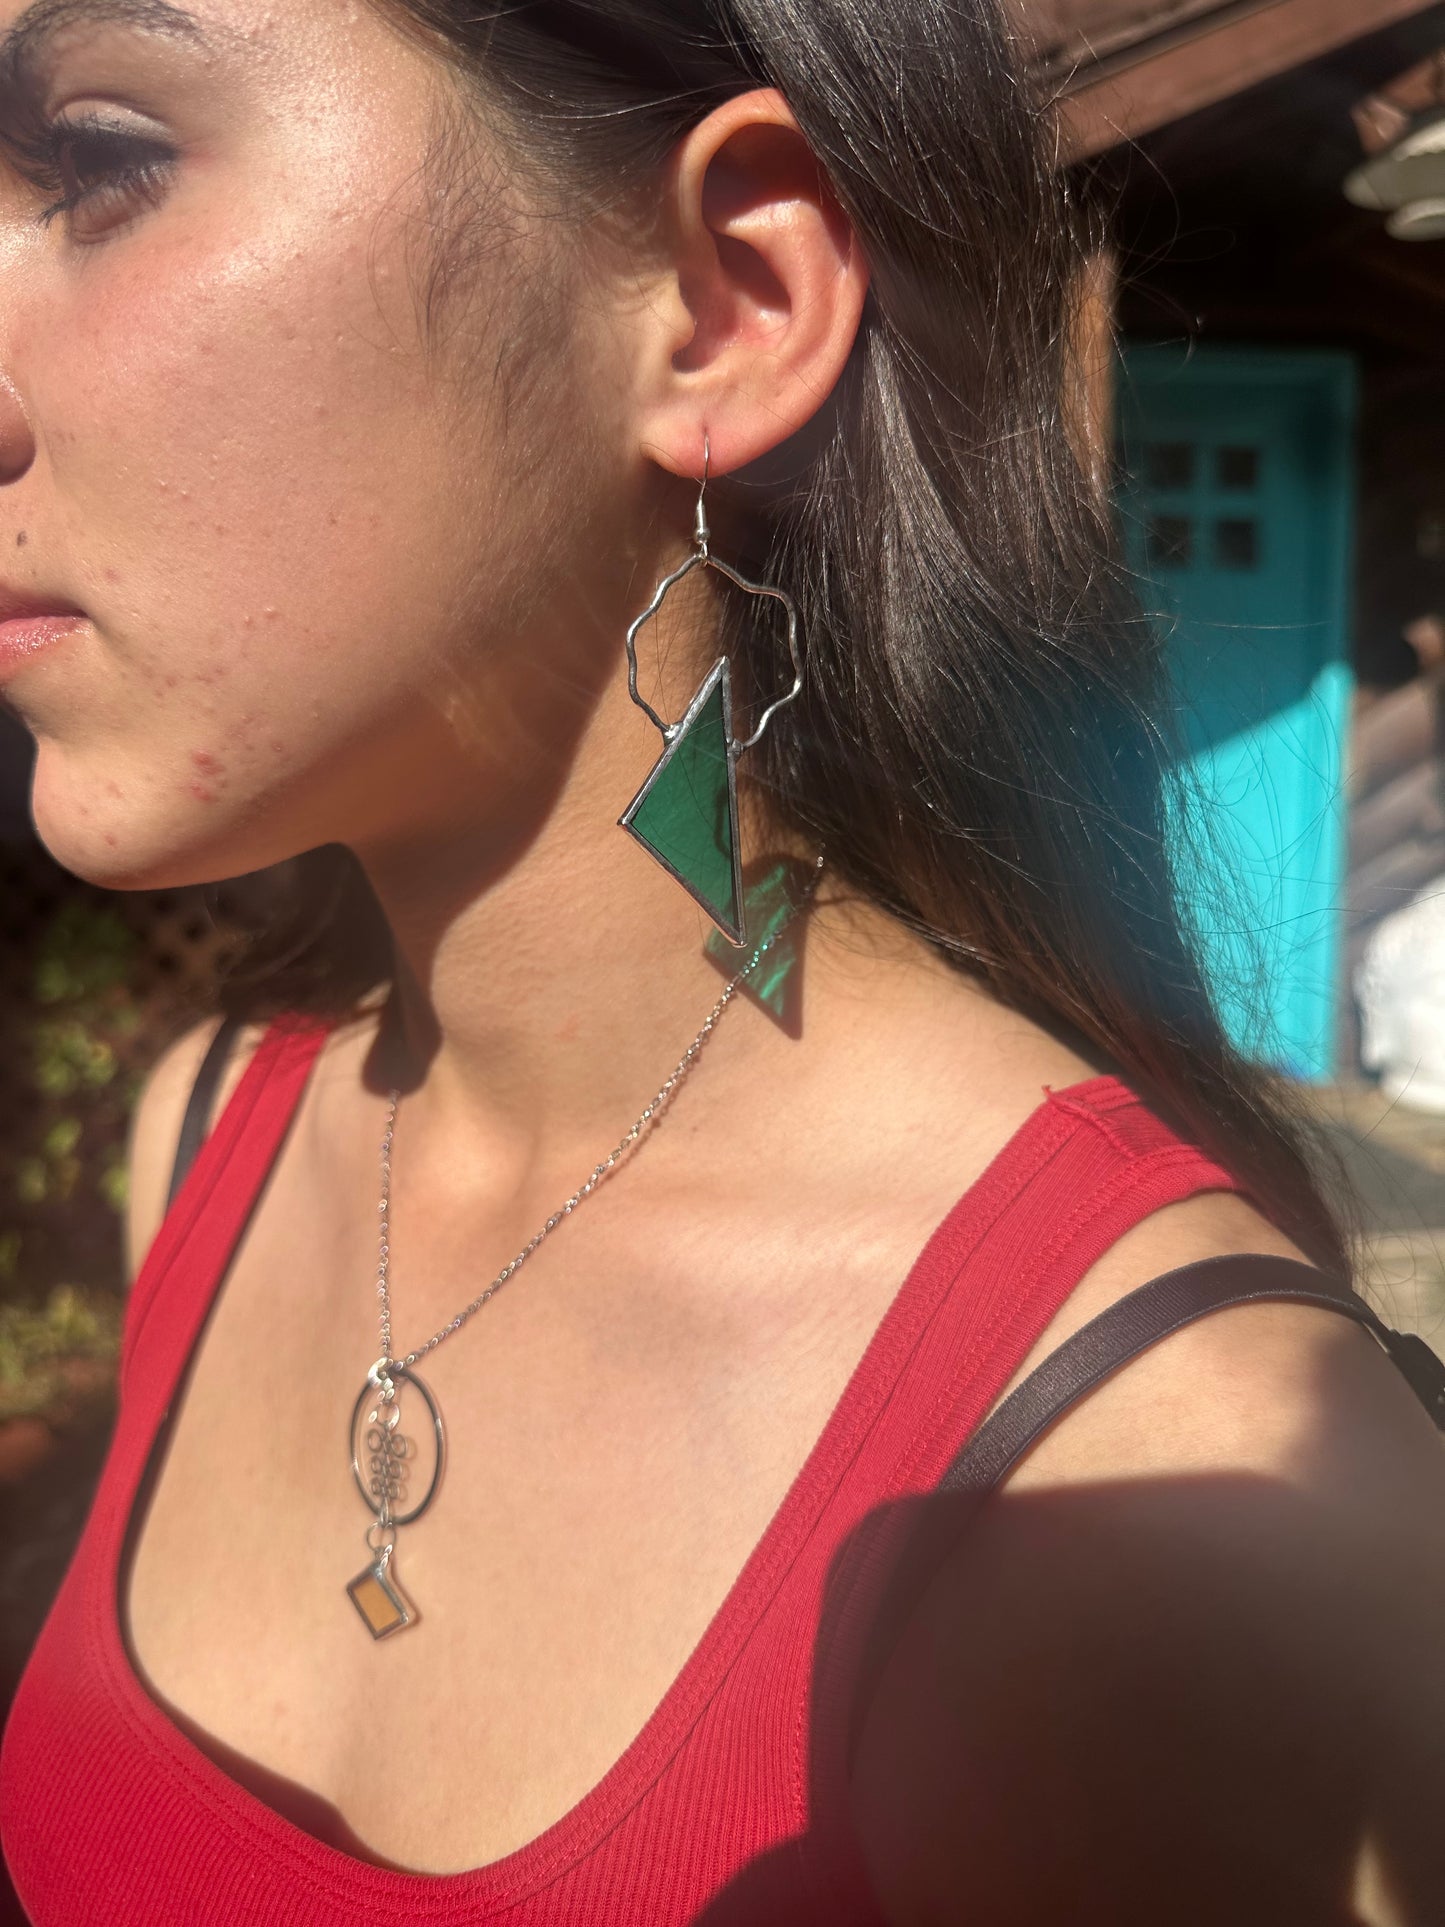 Squiggly Green Stained Glass Earrings